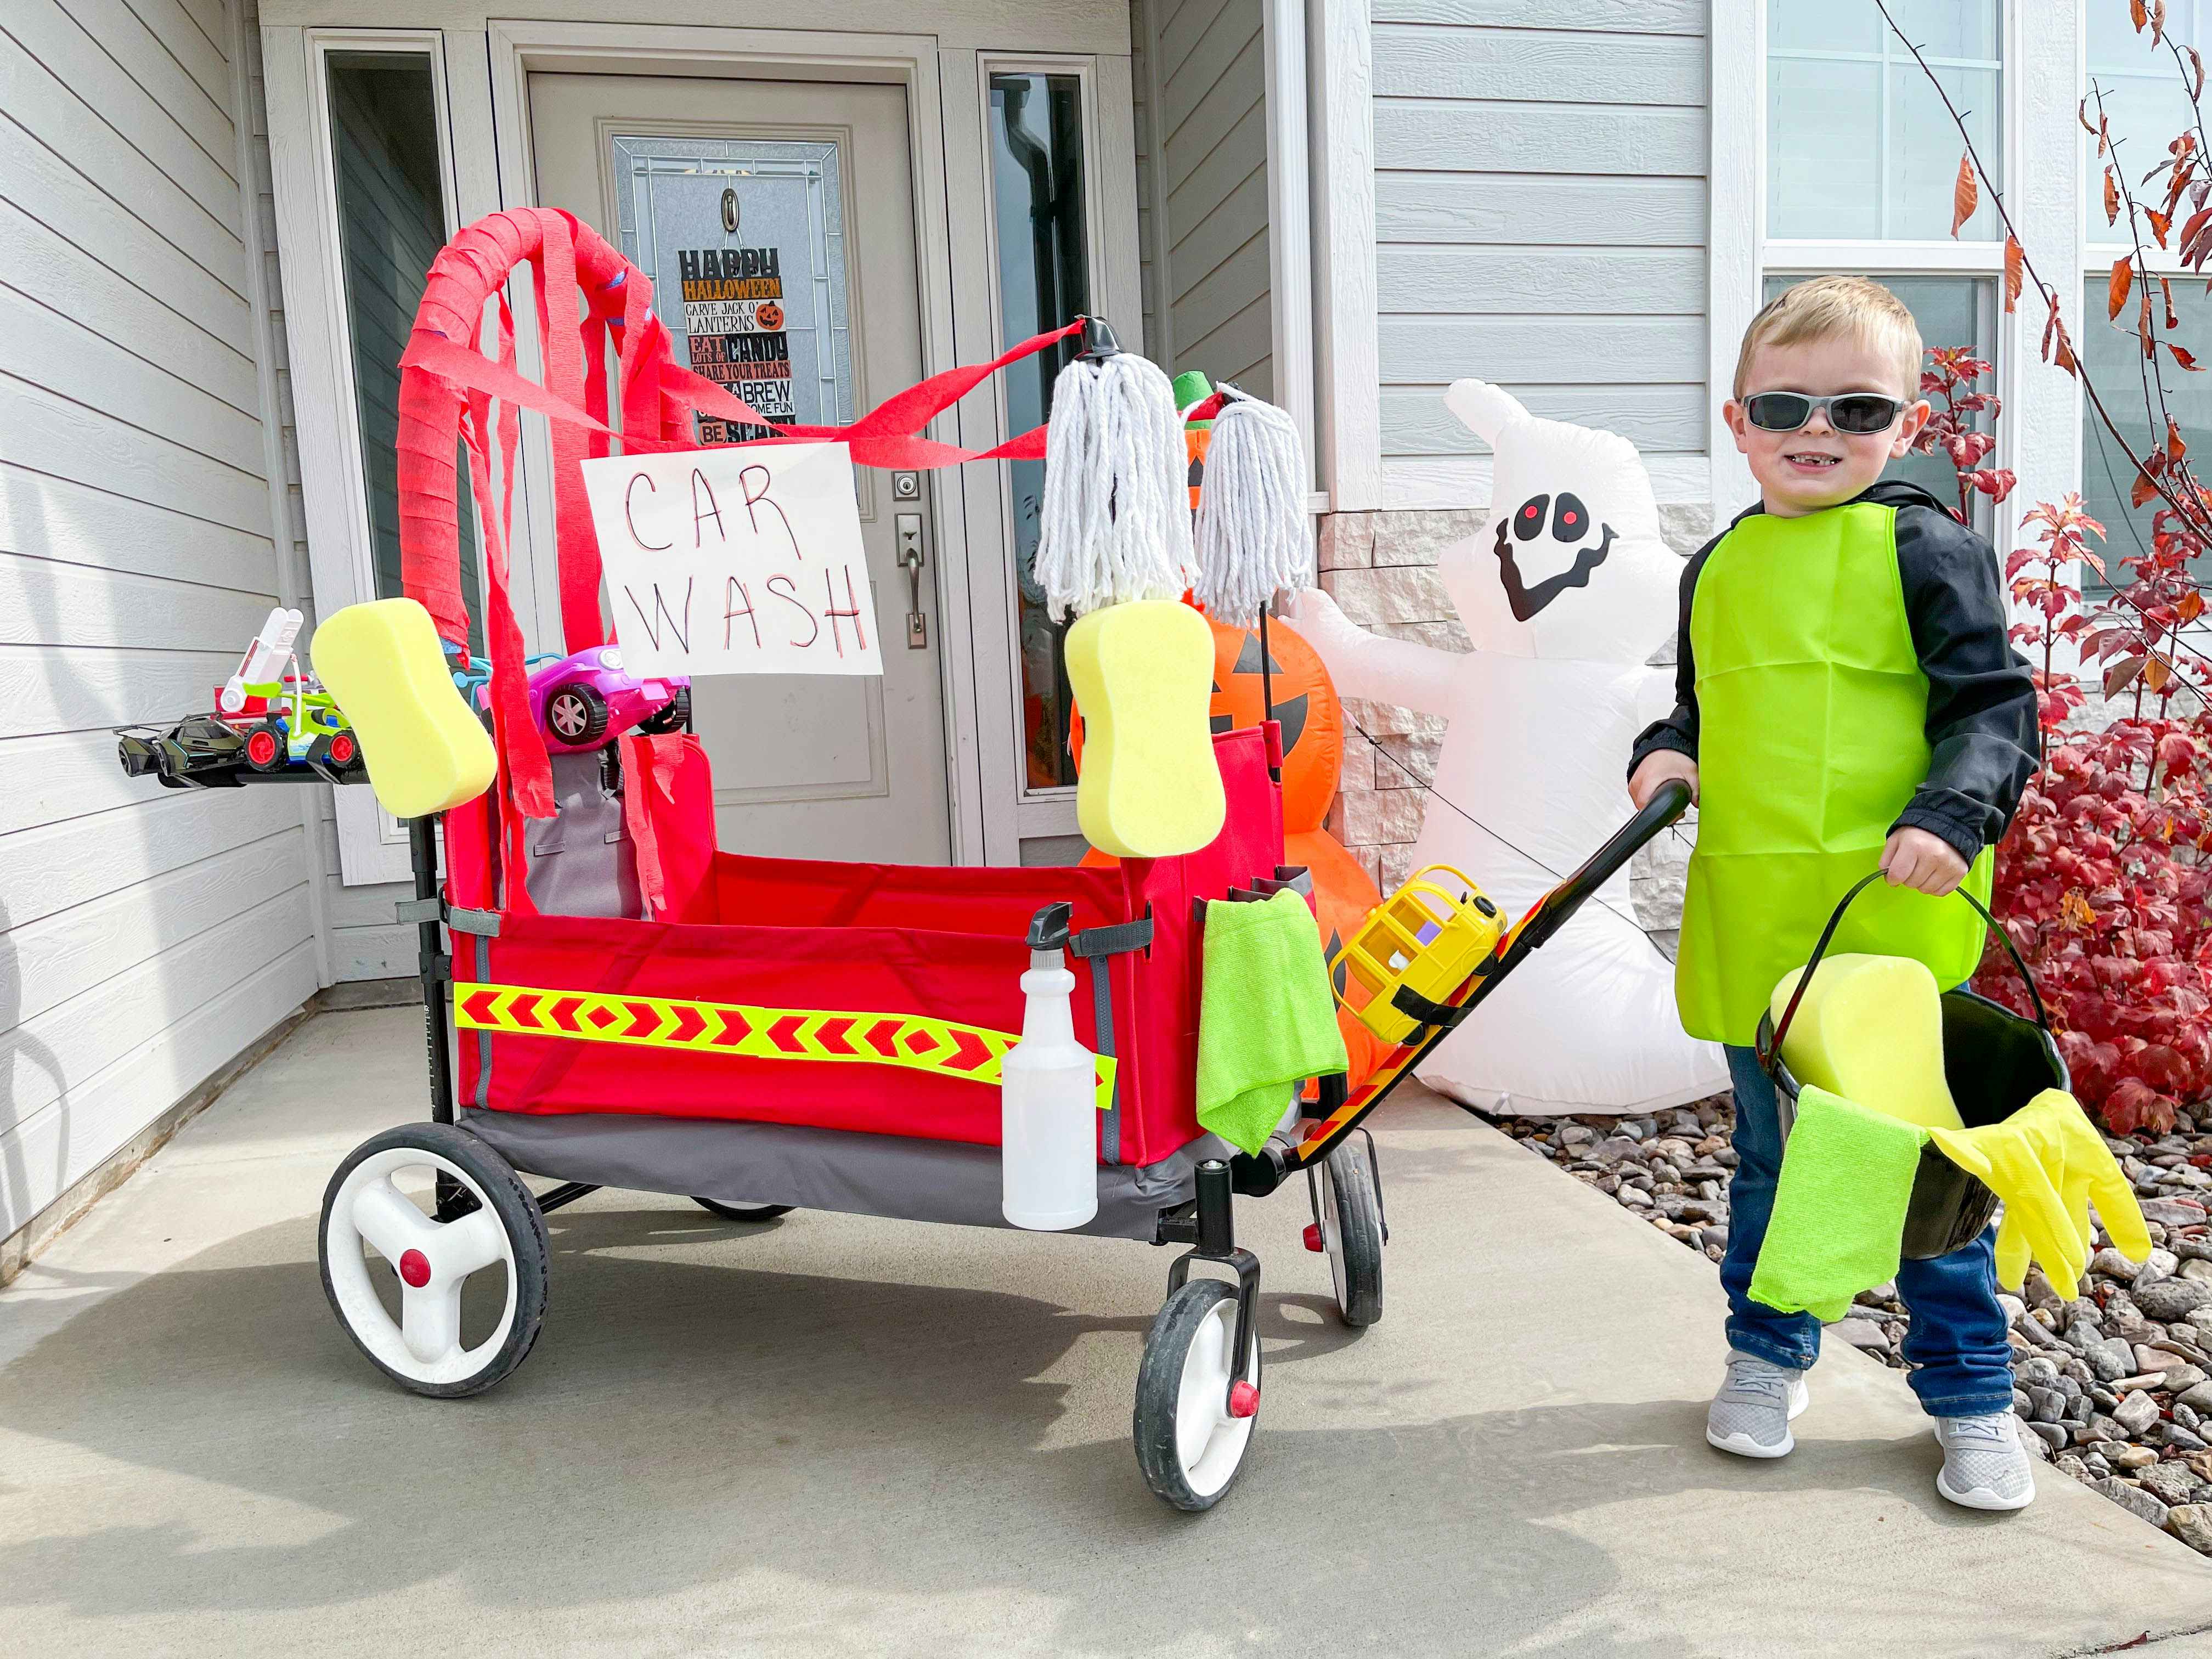 A boy wearing a car wash attendant costume using a wagon made up to look like a car wash.